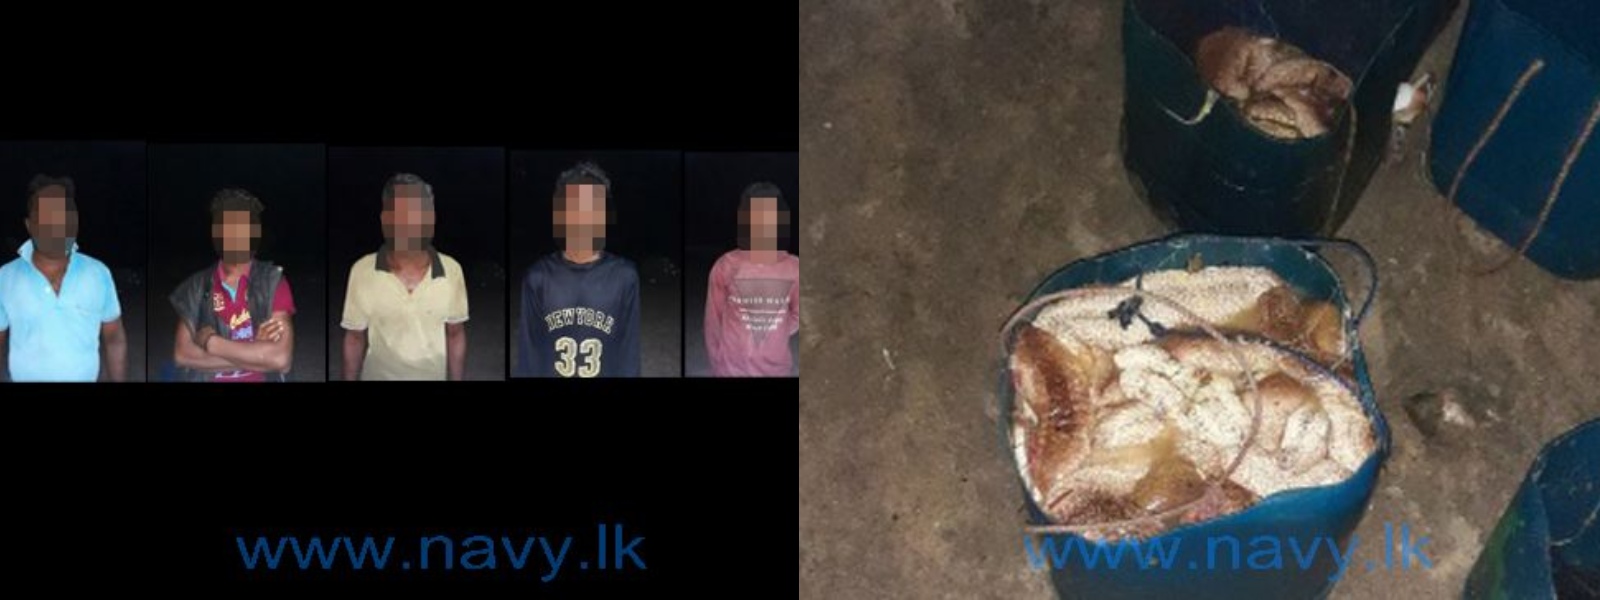 5 arrested with illegally caught sea cucumbers